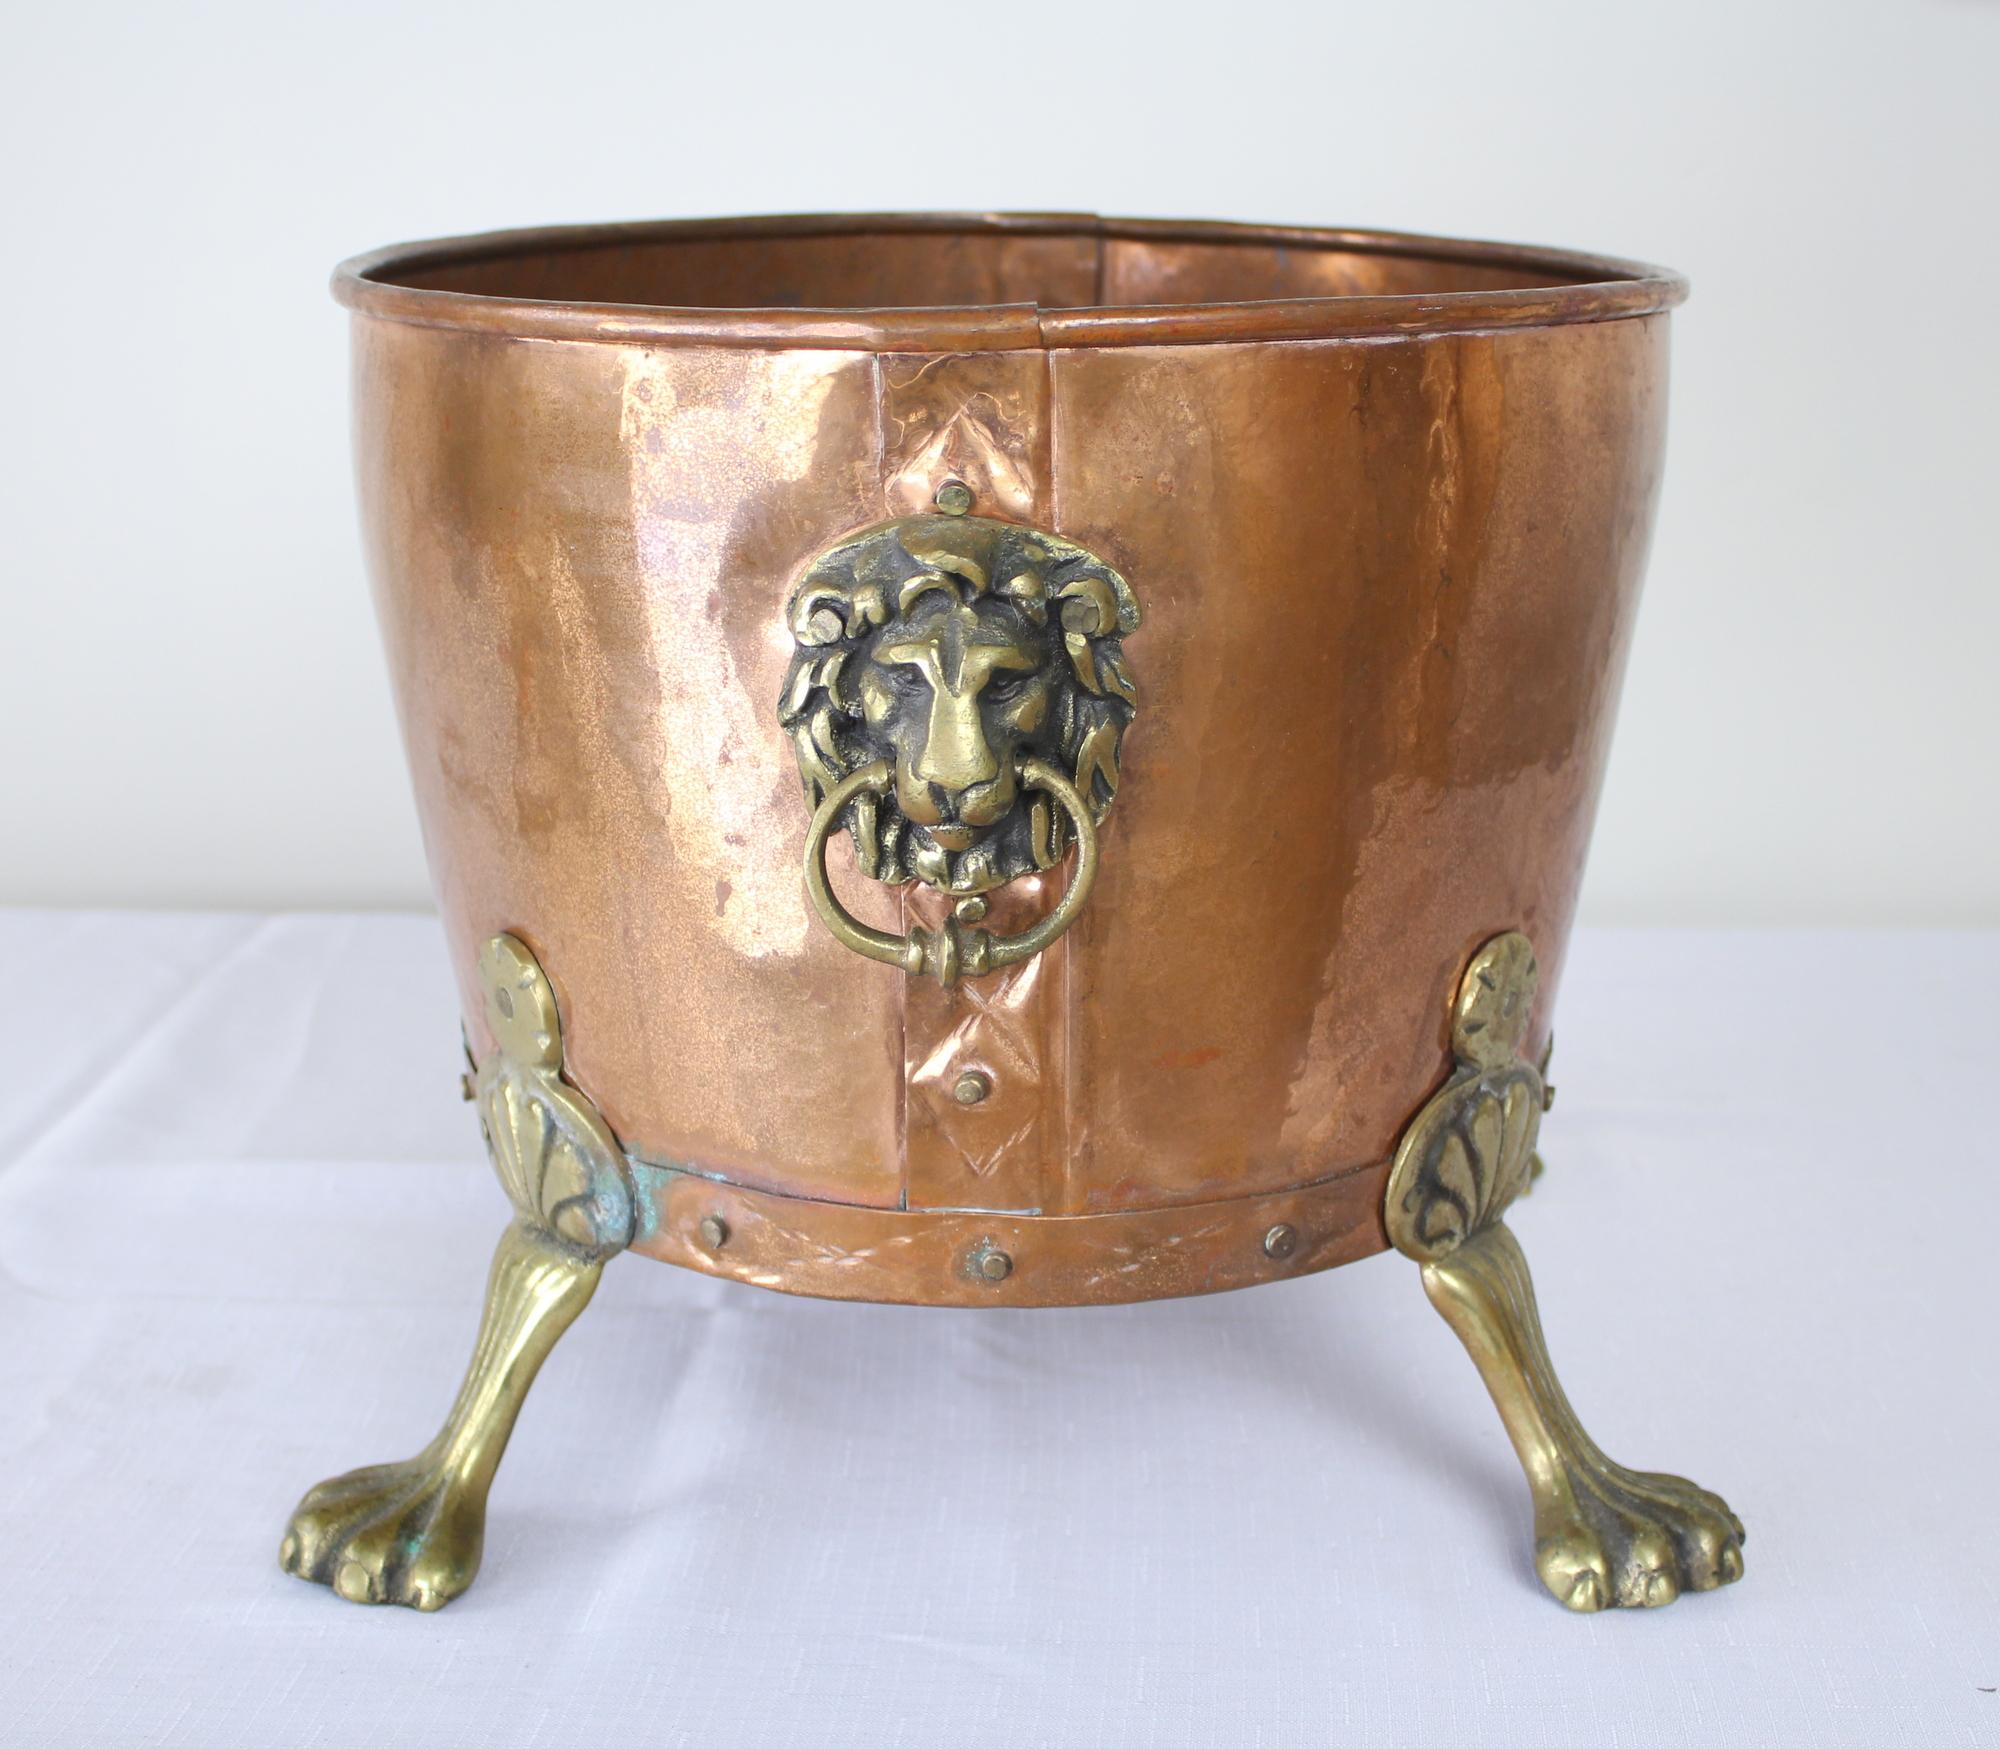 A stylish copper log bin with feline brass accents! Some wear and Verdigris on the inside, to be expected in a piece of this age.